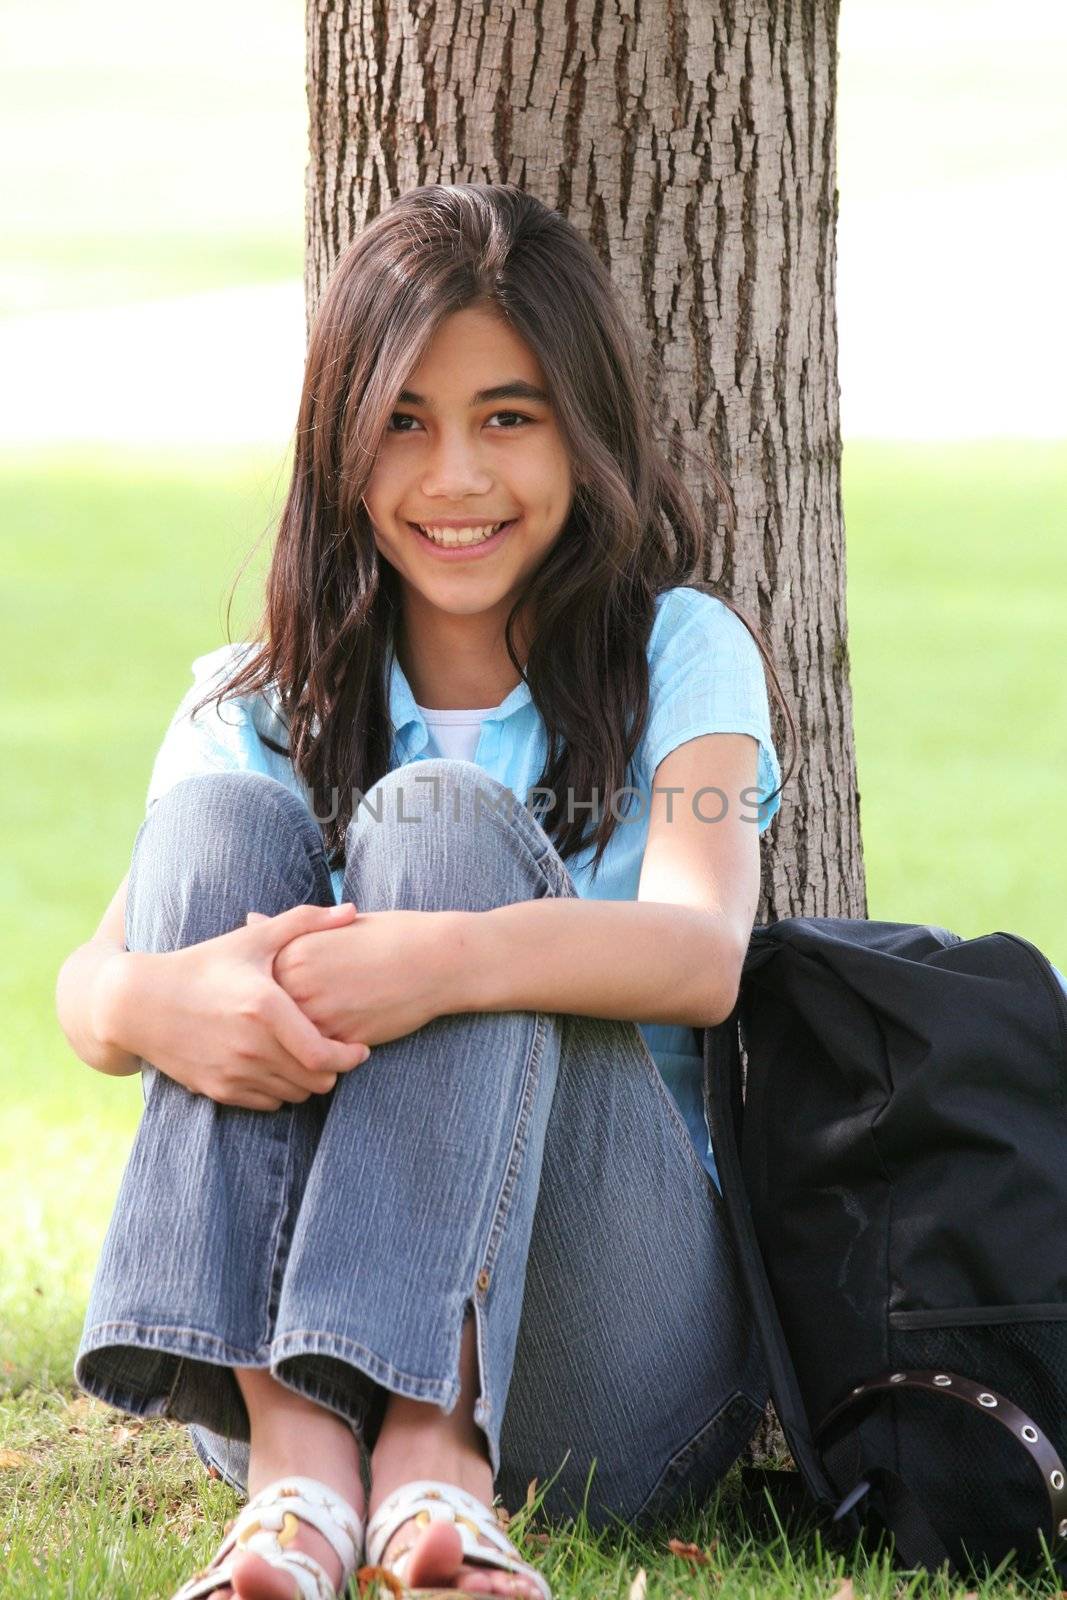 Young teen girl sitting against tree with backpack. Part Asian, Scandinavian background.

;